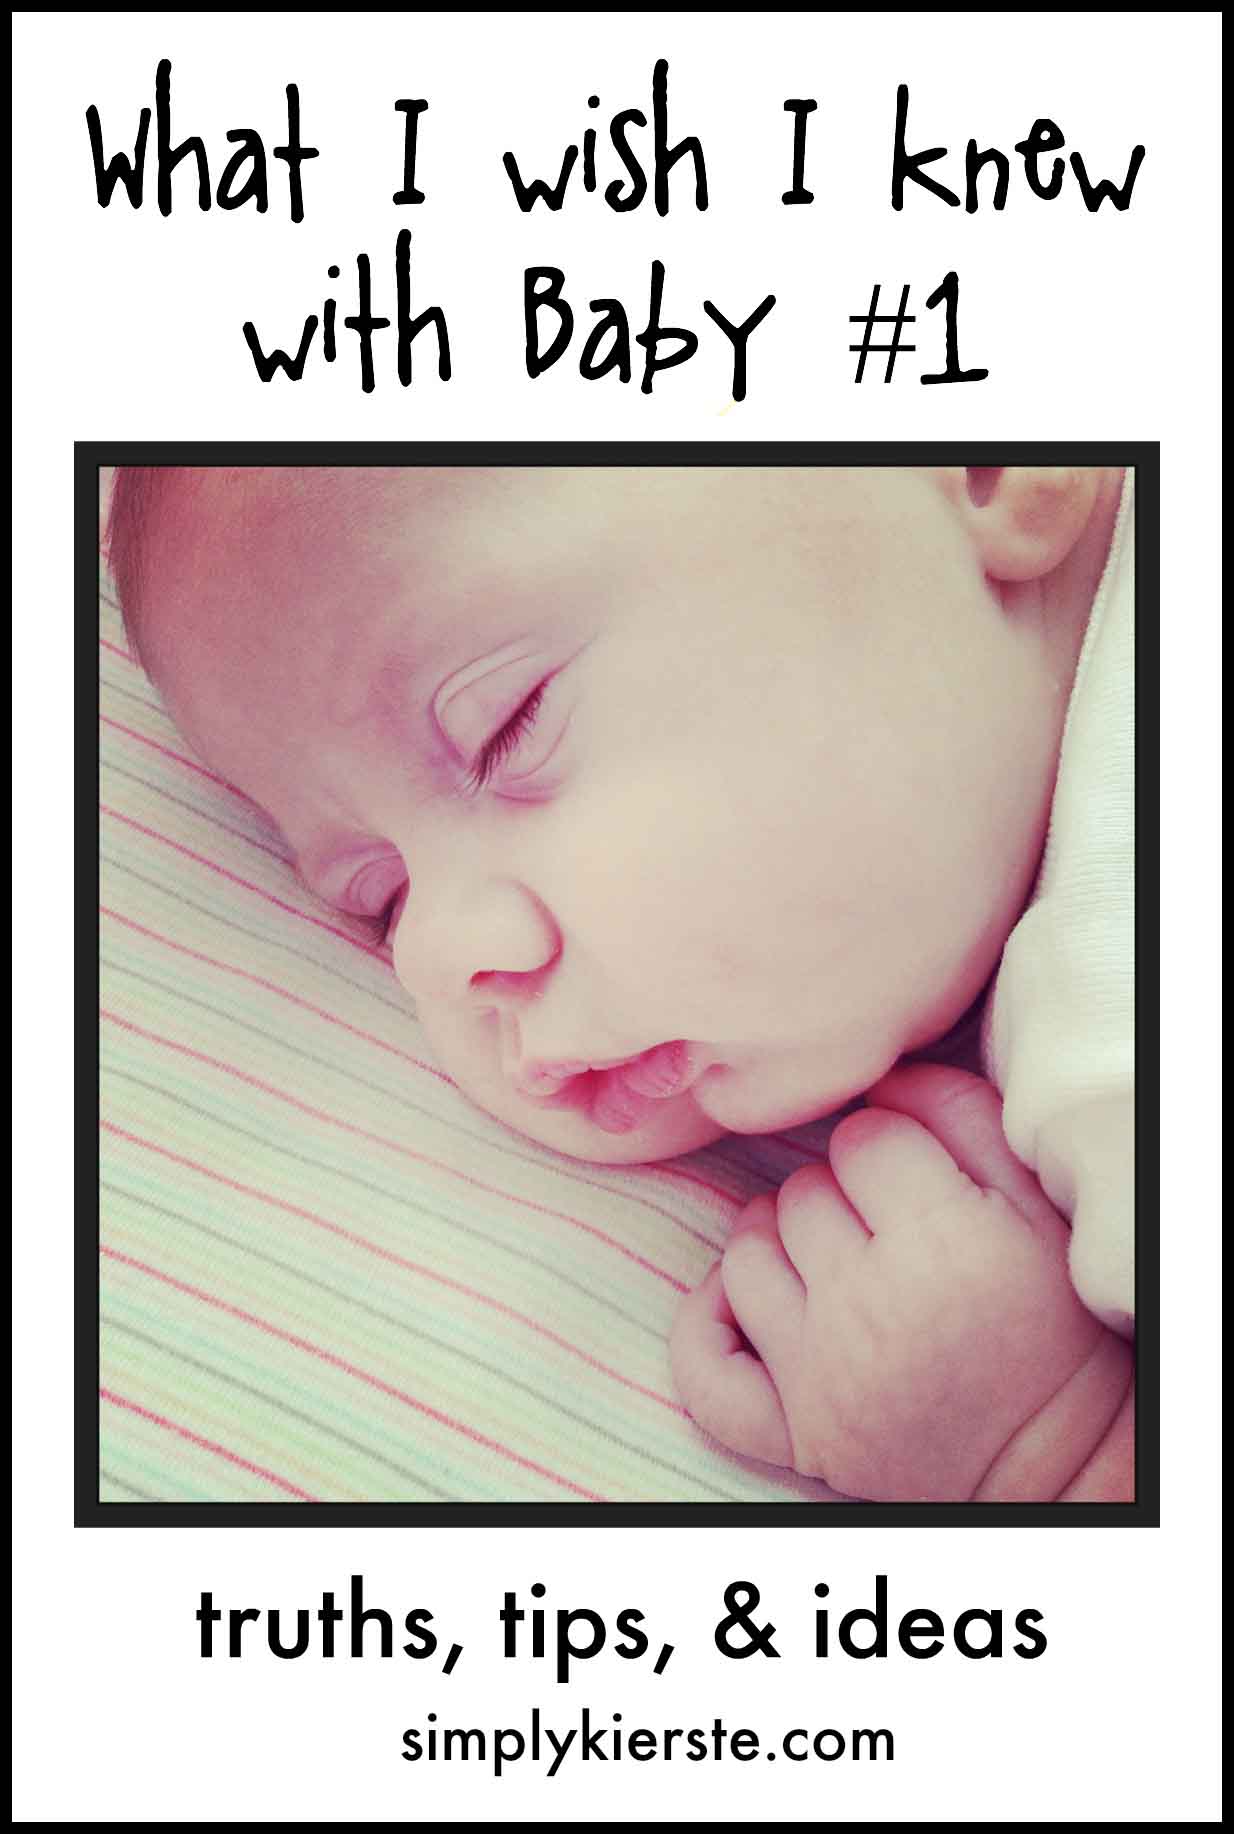 What I wish I knew with baby # 1…truths, tips, and ideas